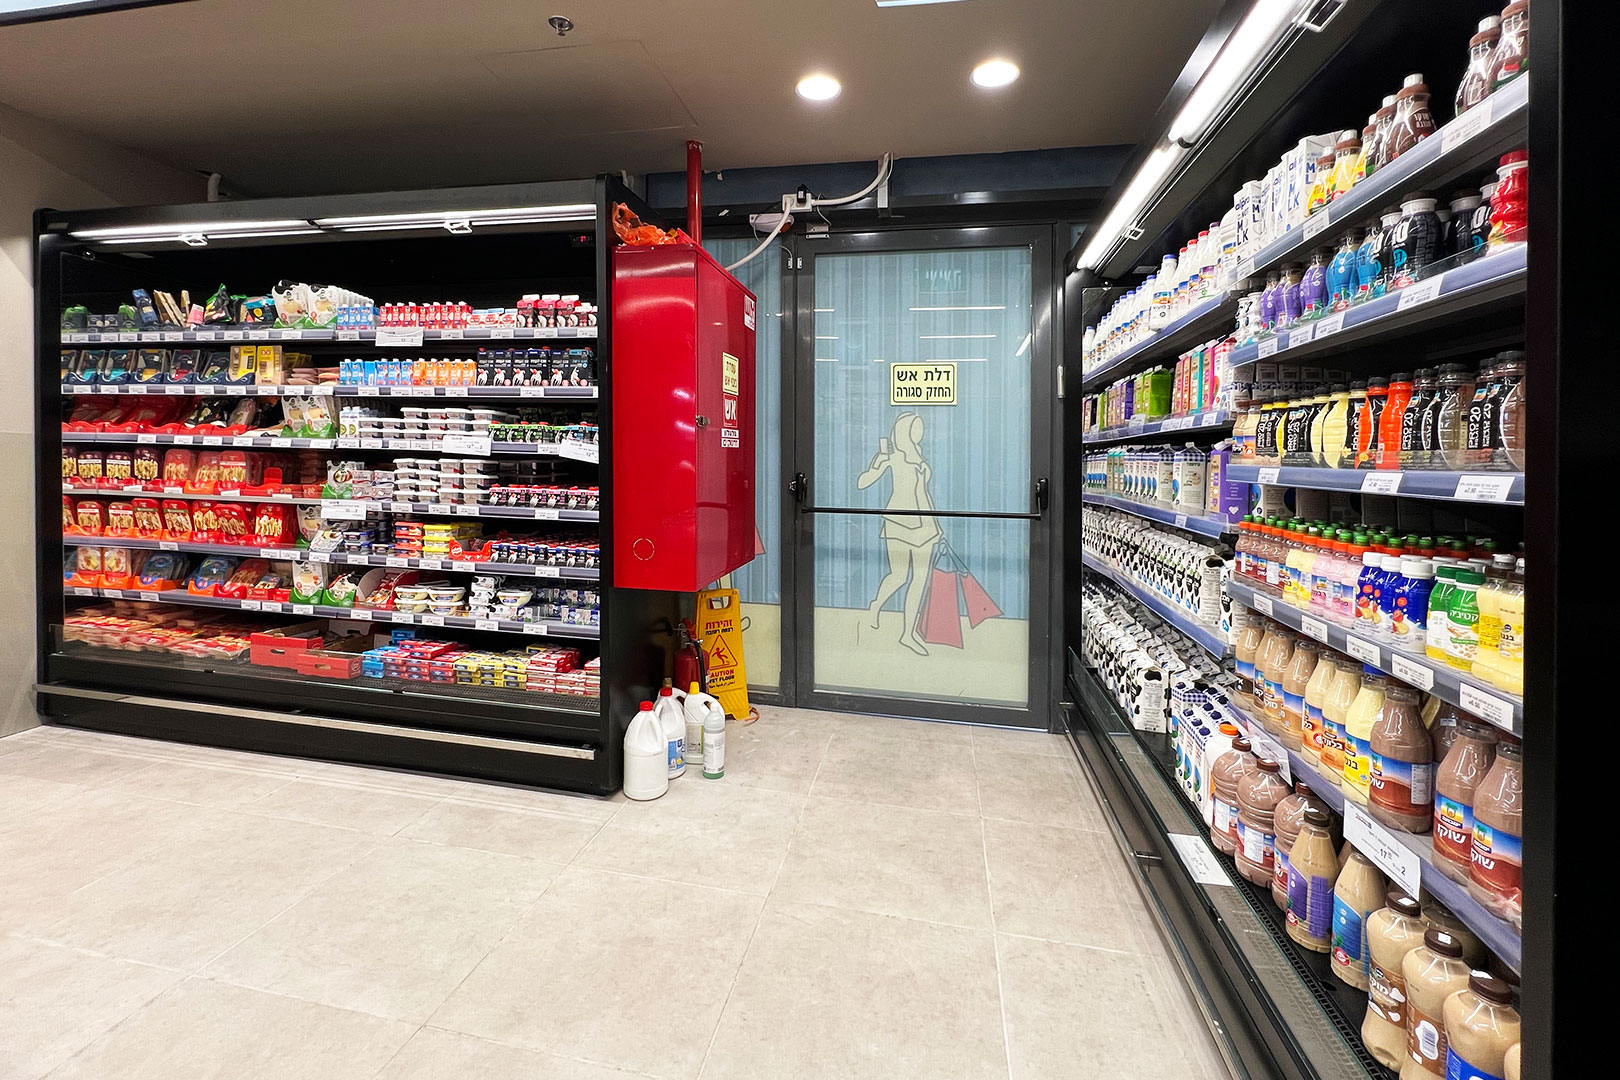 Refrigerated multideck cabinets Indiana 2 MV MT O M, convenience store (Israel)